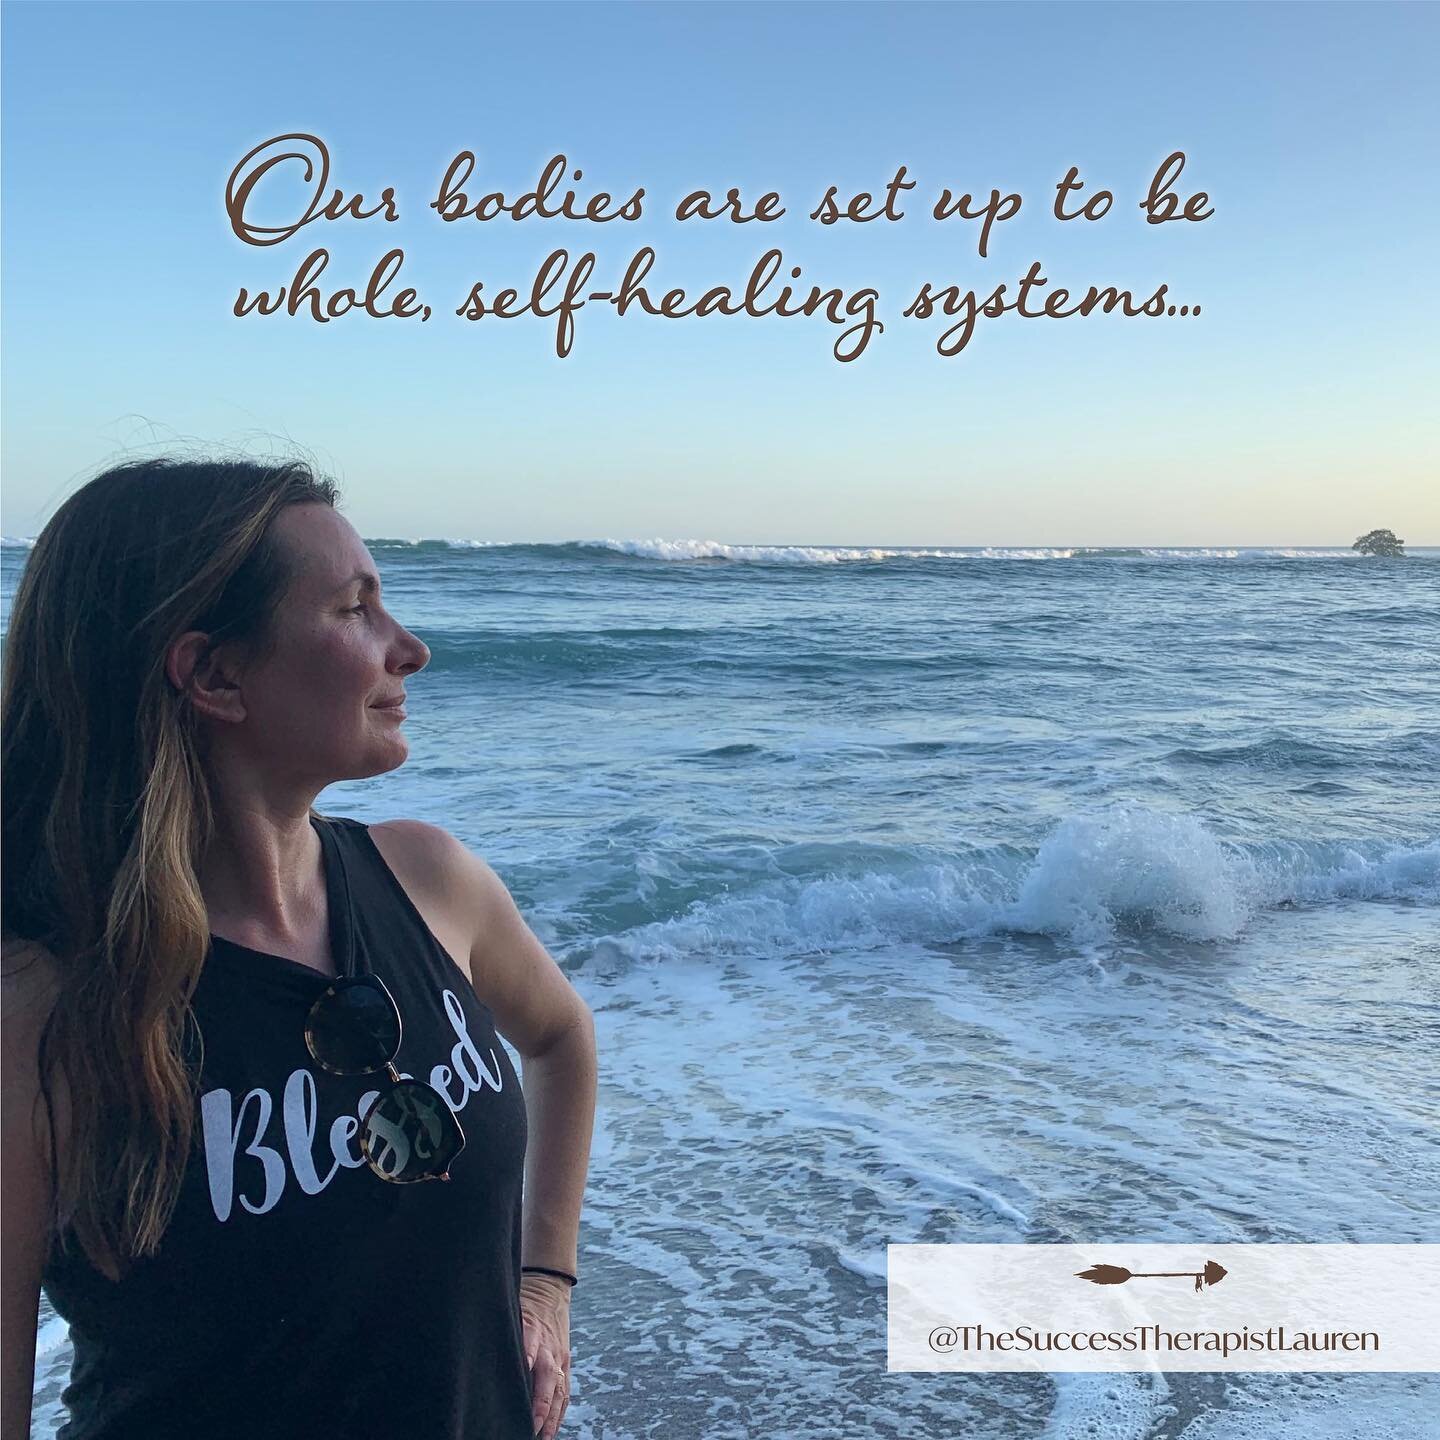 Did you know our bodies are set up to be whole, self-healing systems?

#healing #positivemindset #therapy #therapistsofinstagram #fightorflight #parasympatheticnervoussystem #restanddigest #somatic #somatictherapy